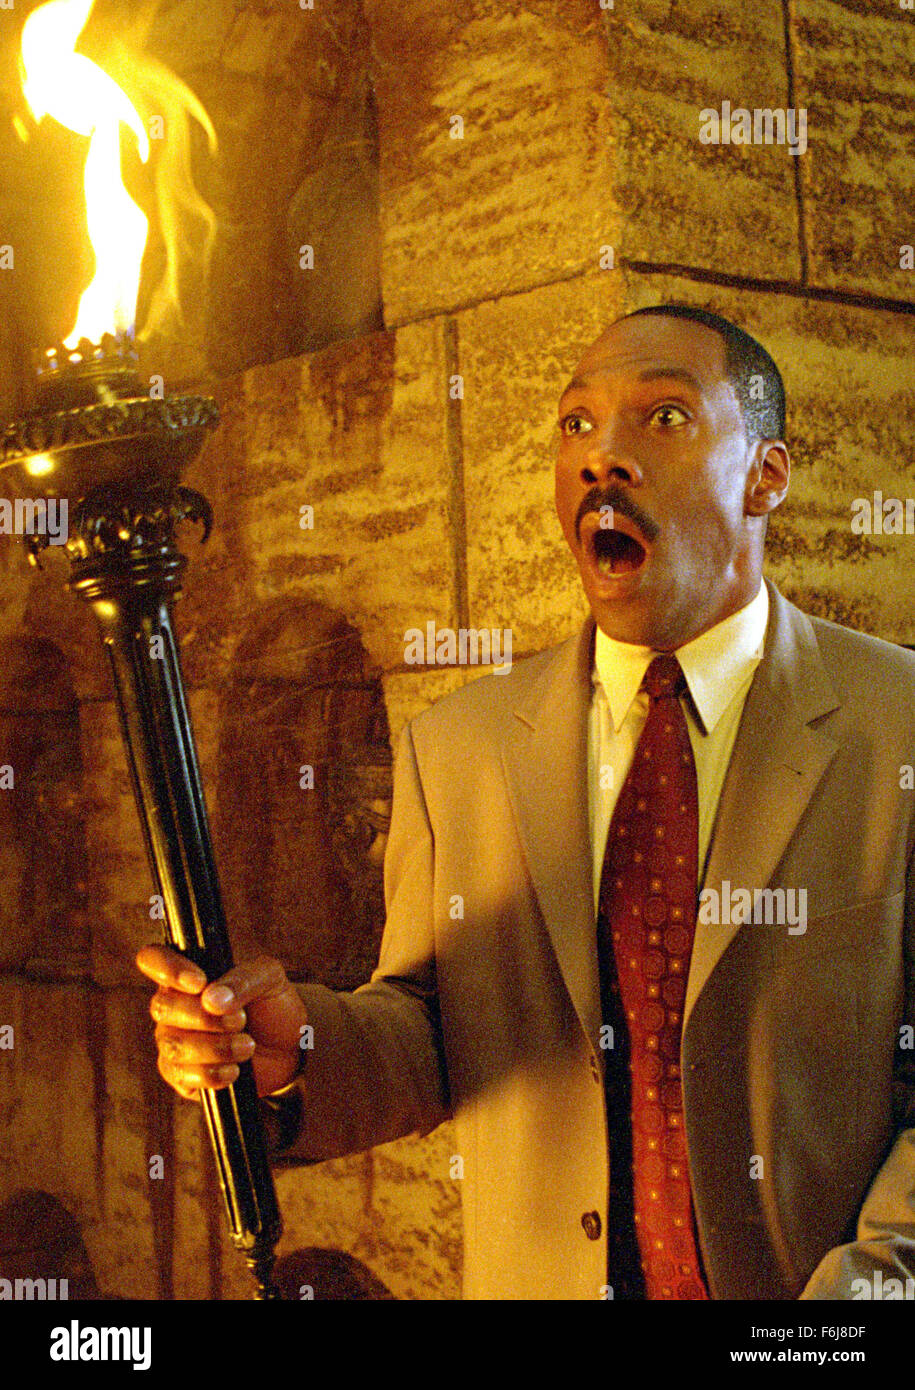 Mar 09, 2003; Hollywood, CA, USA; EDDIE MURPHY stars as Jim Evers in the family comedy/horror 'The Haunted Mansion' directed by Rob Minkoff. Stock Photo